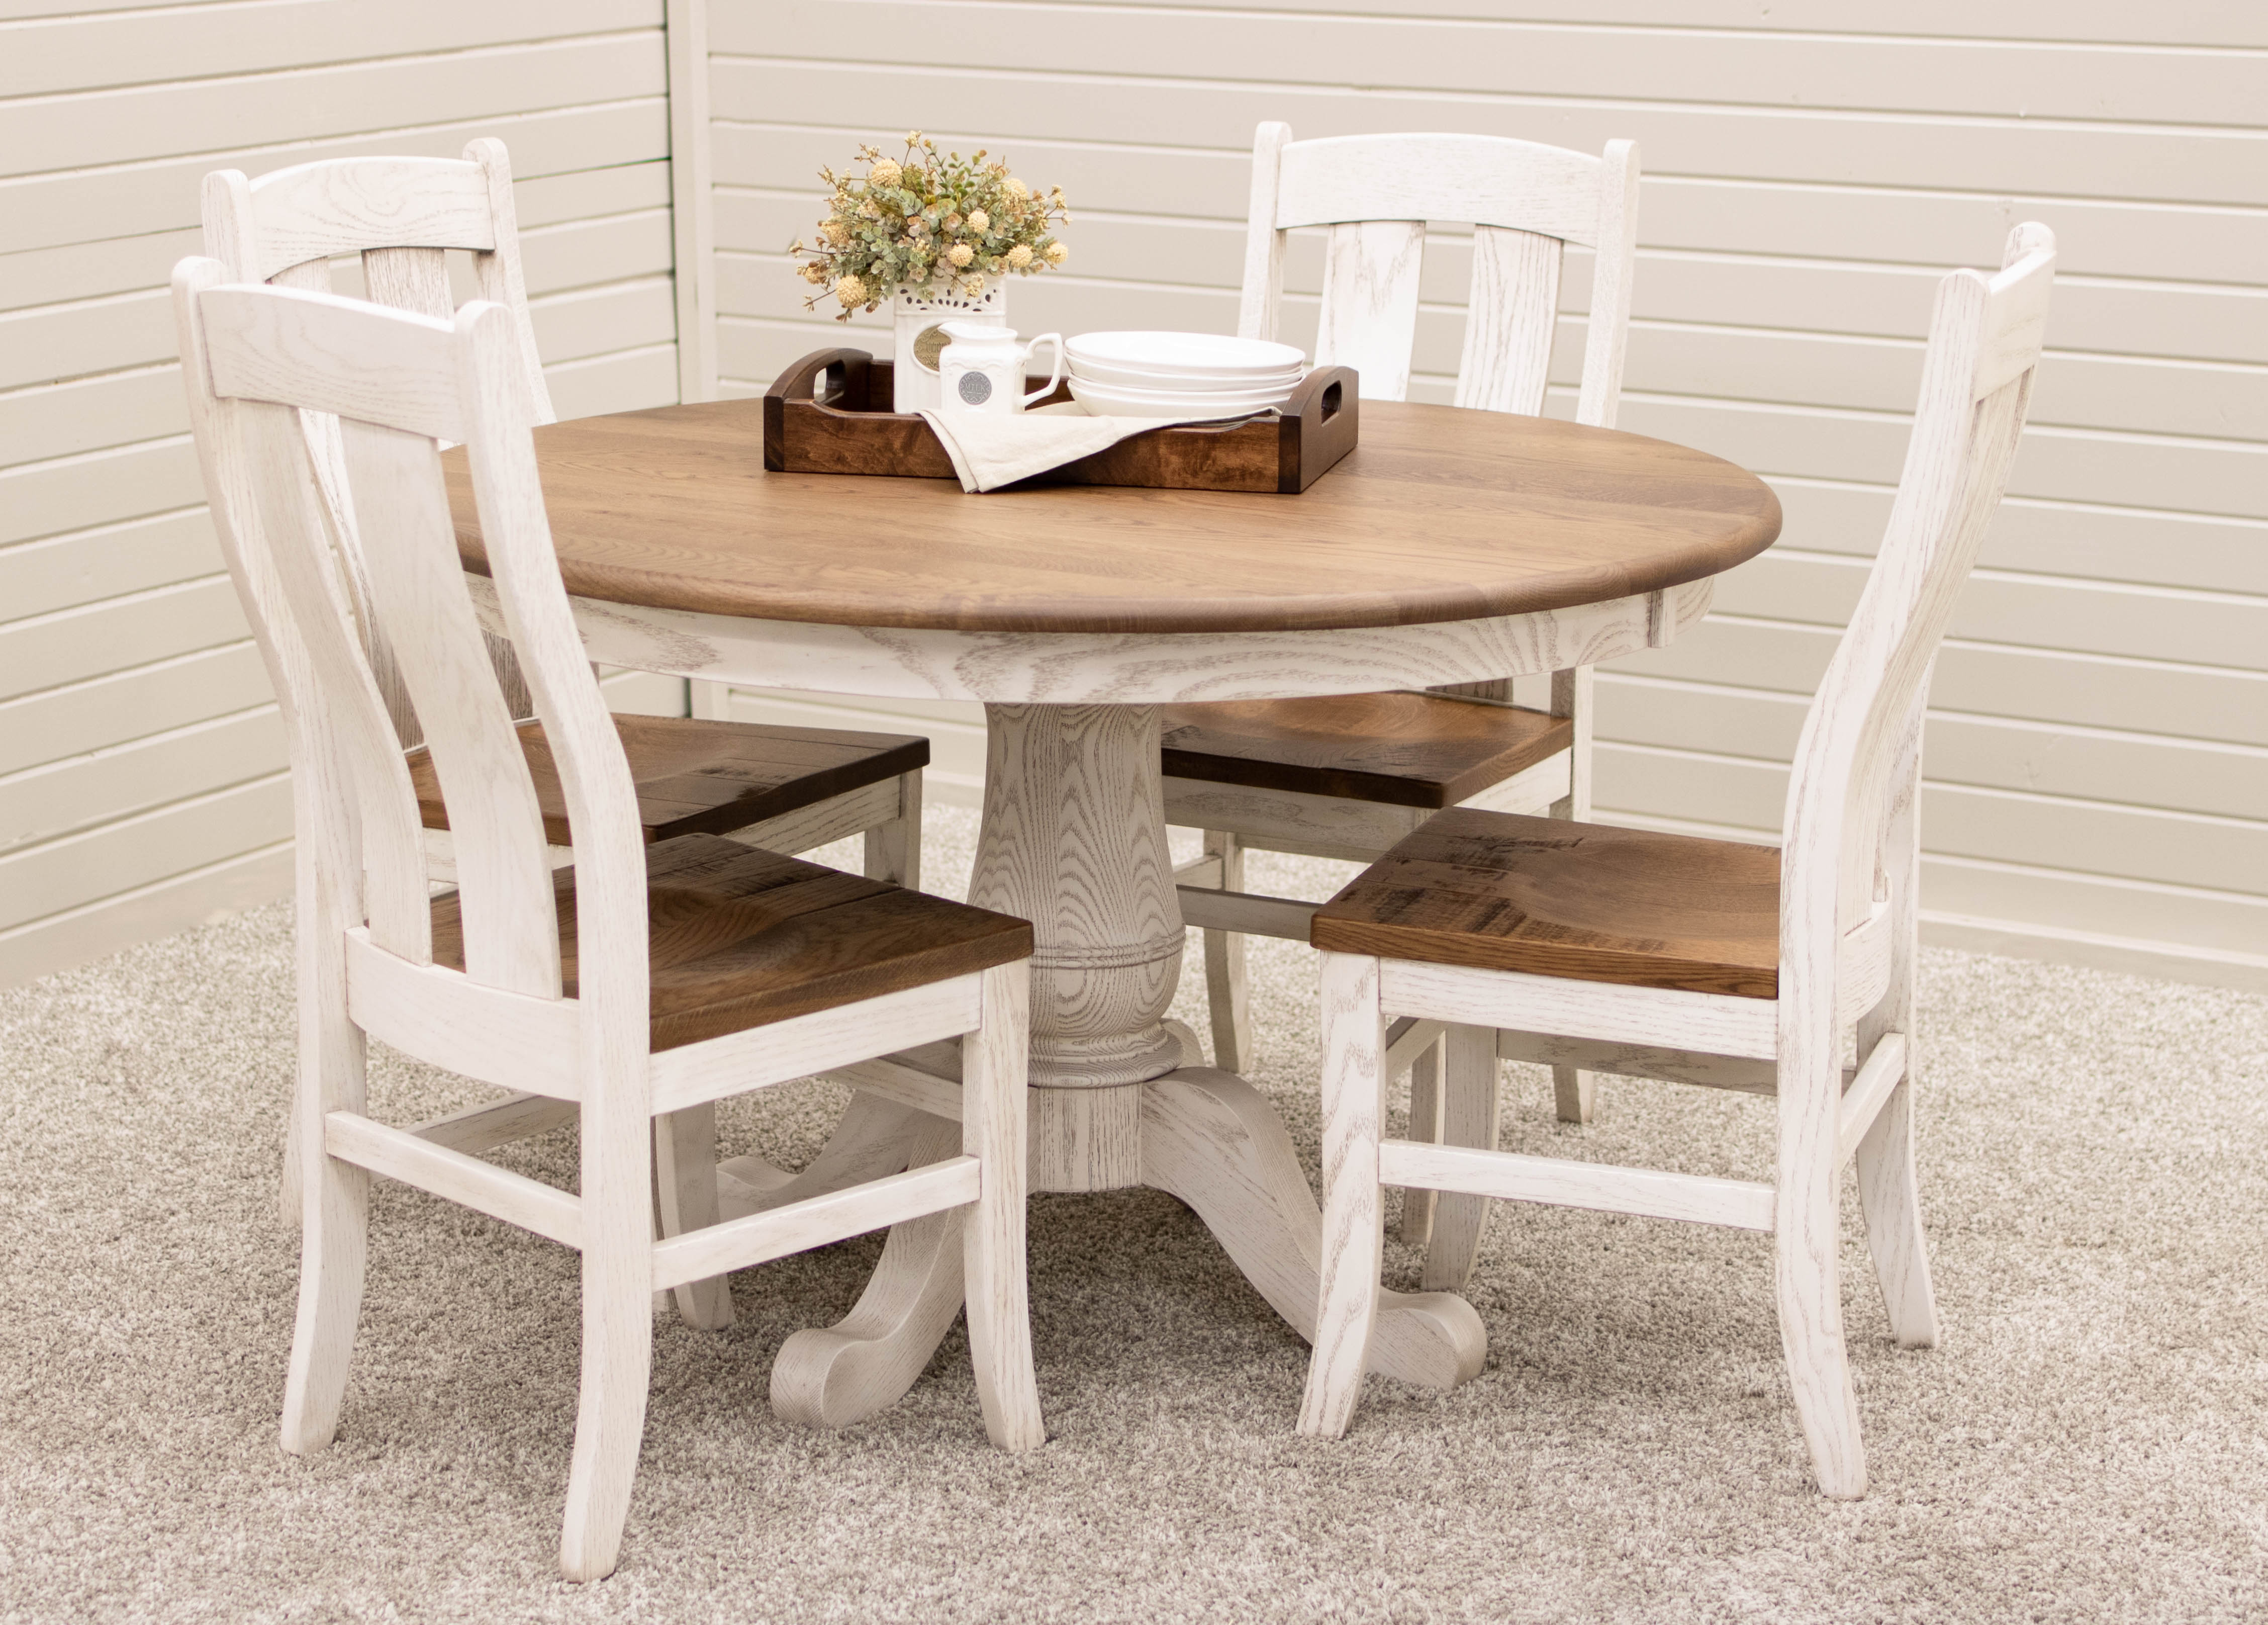 Top 5 Chairs for Small Round Tables